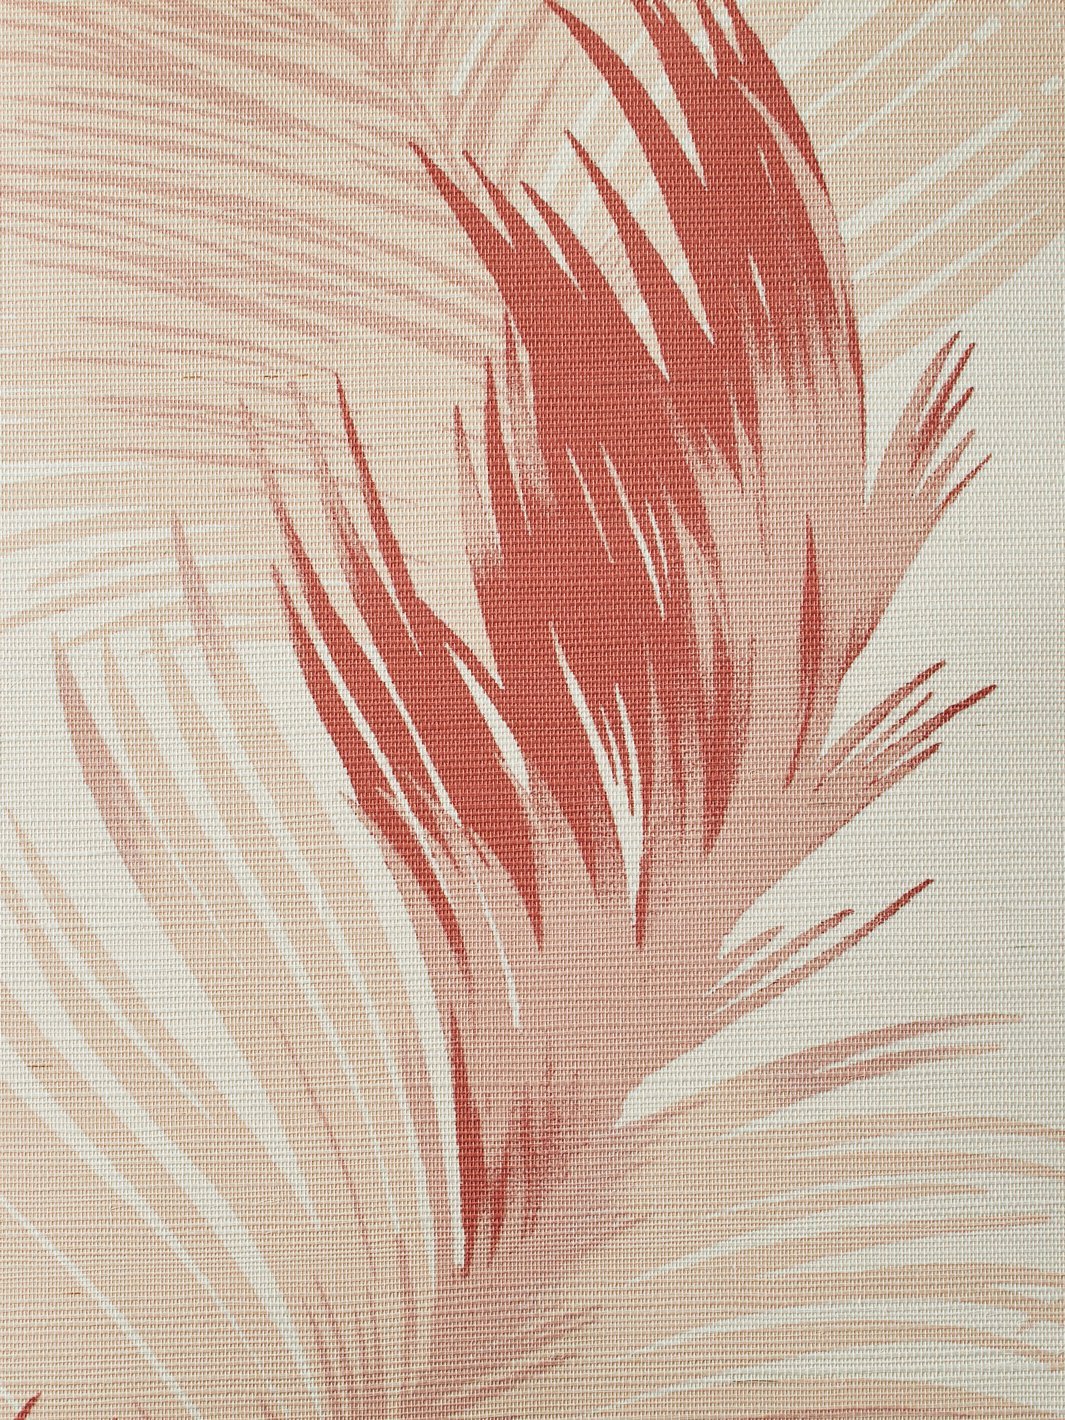 'Belafonte Palm' Grasscloth' Wallpaper by Nathan Turner - Flame